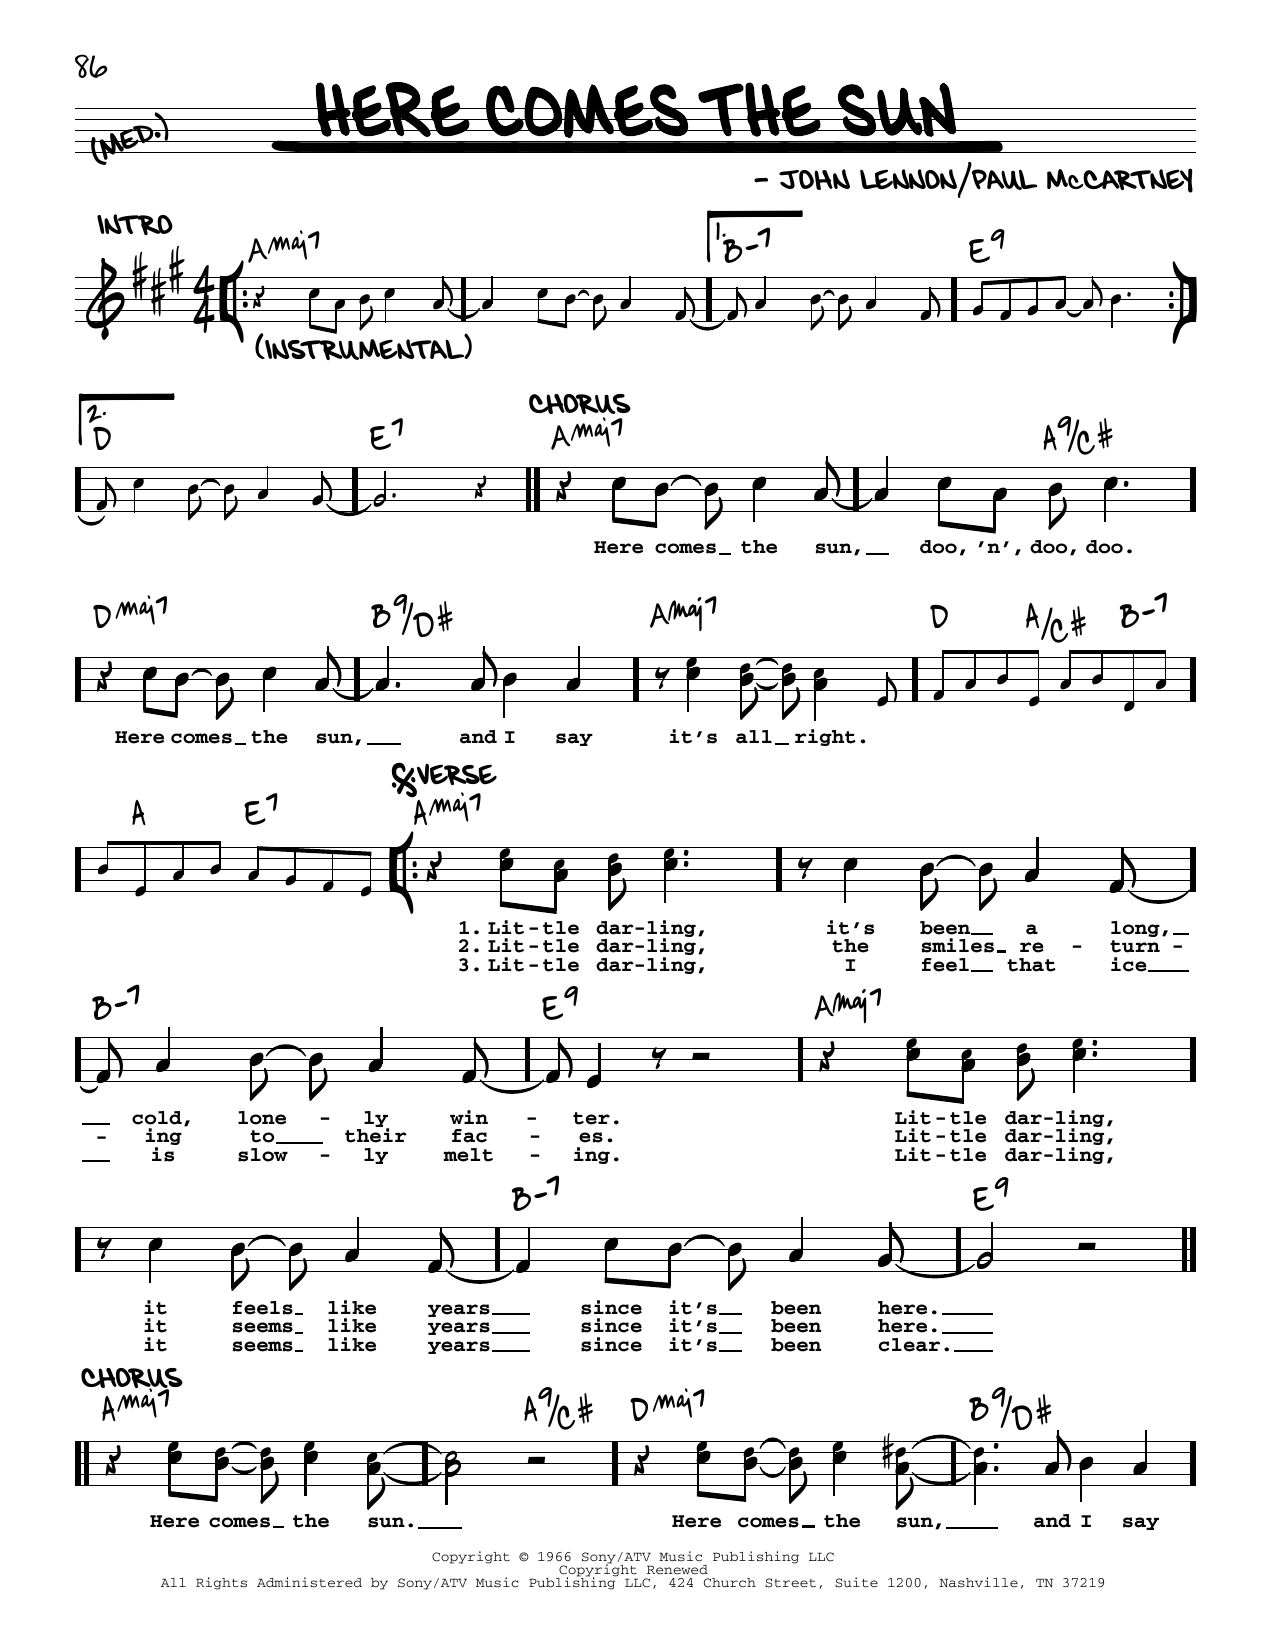 Download The Beatles Here Comes The Sun [Jazz version] Sheet Music